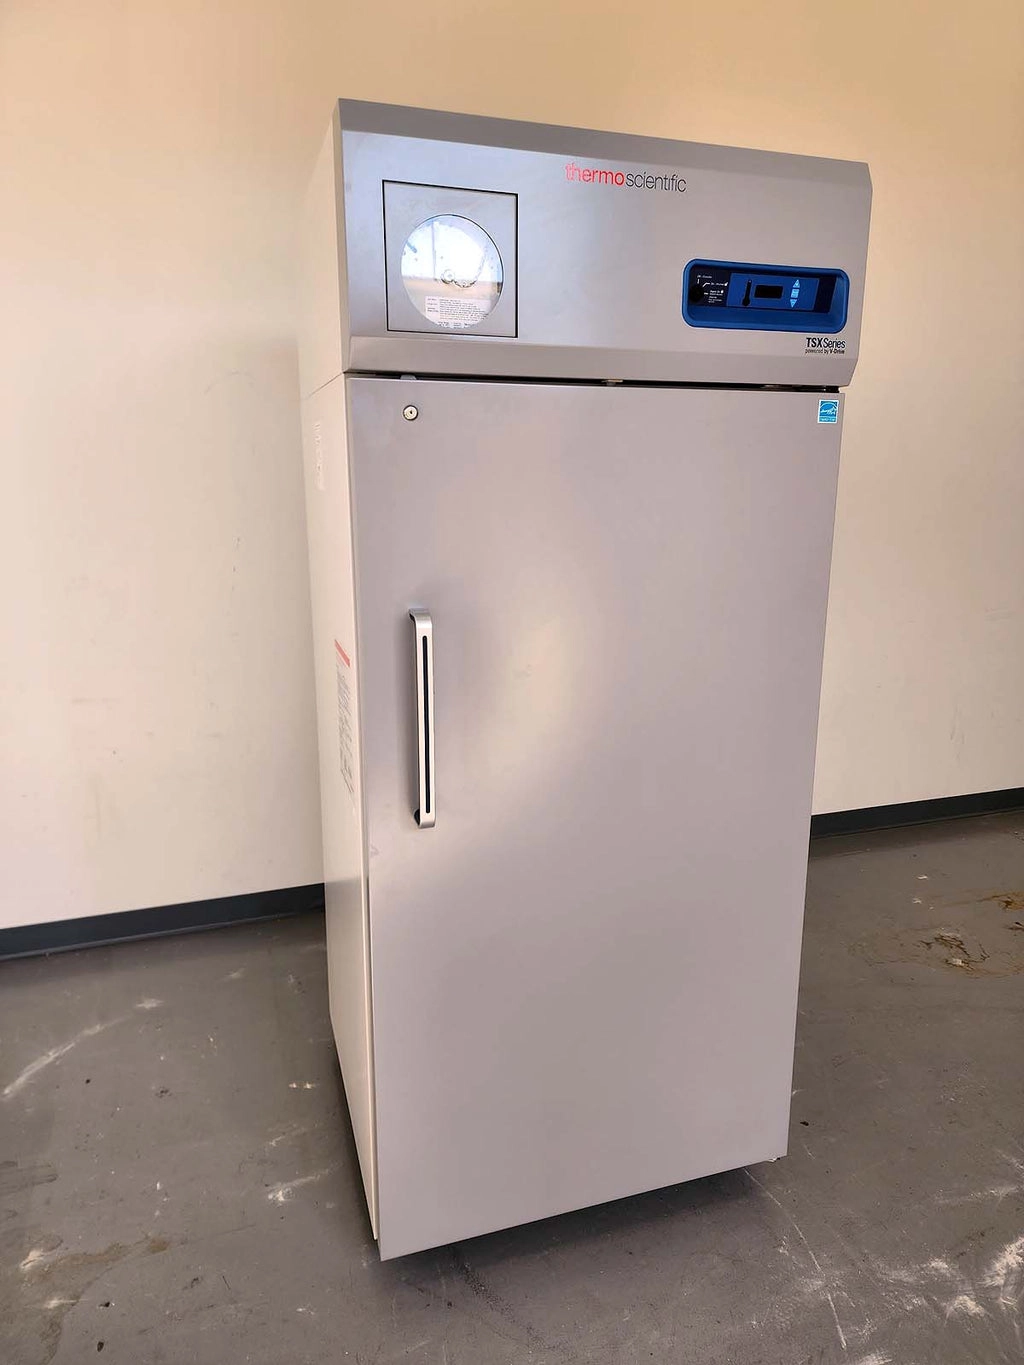 Thermo Scientific TSX3030FA -30C freezer (29 cu. ft) with chart recorder 120V (pre-owned)